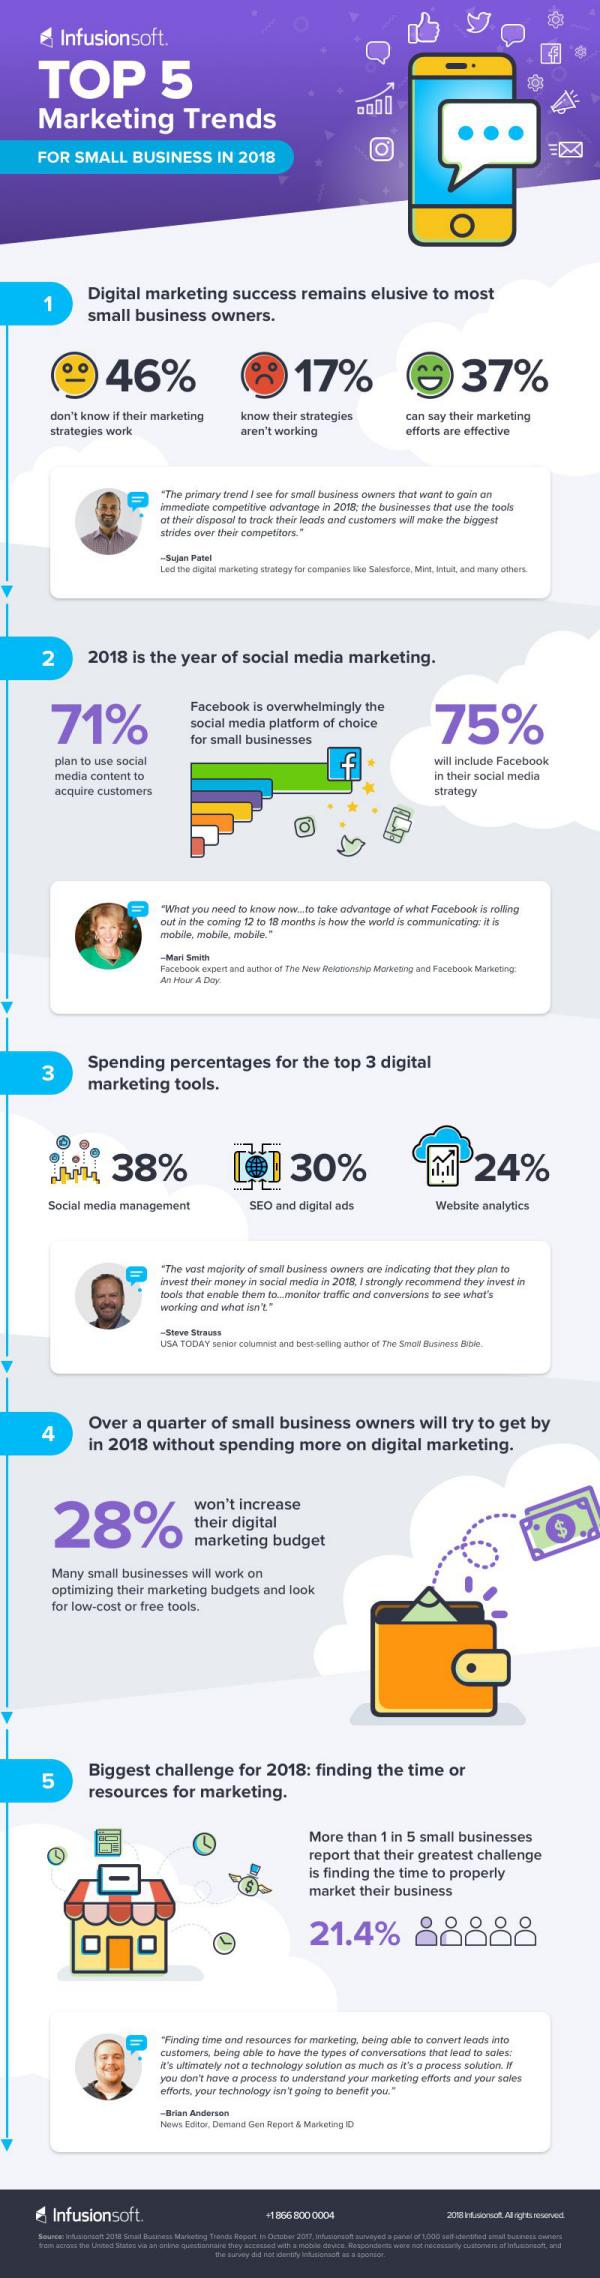 5 Digital Marketing Trends for Small Business in 2018 [Infographic] 5 Digital Marketing Trends for Small Business